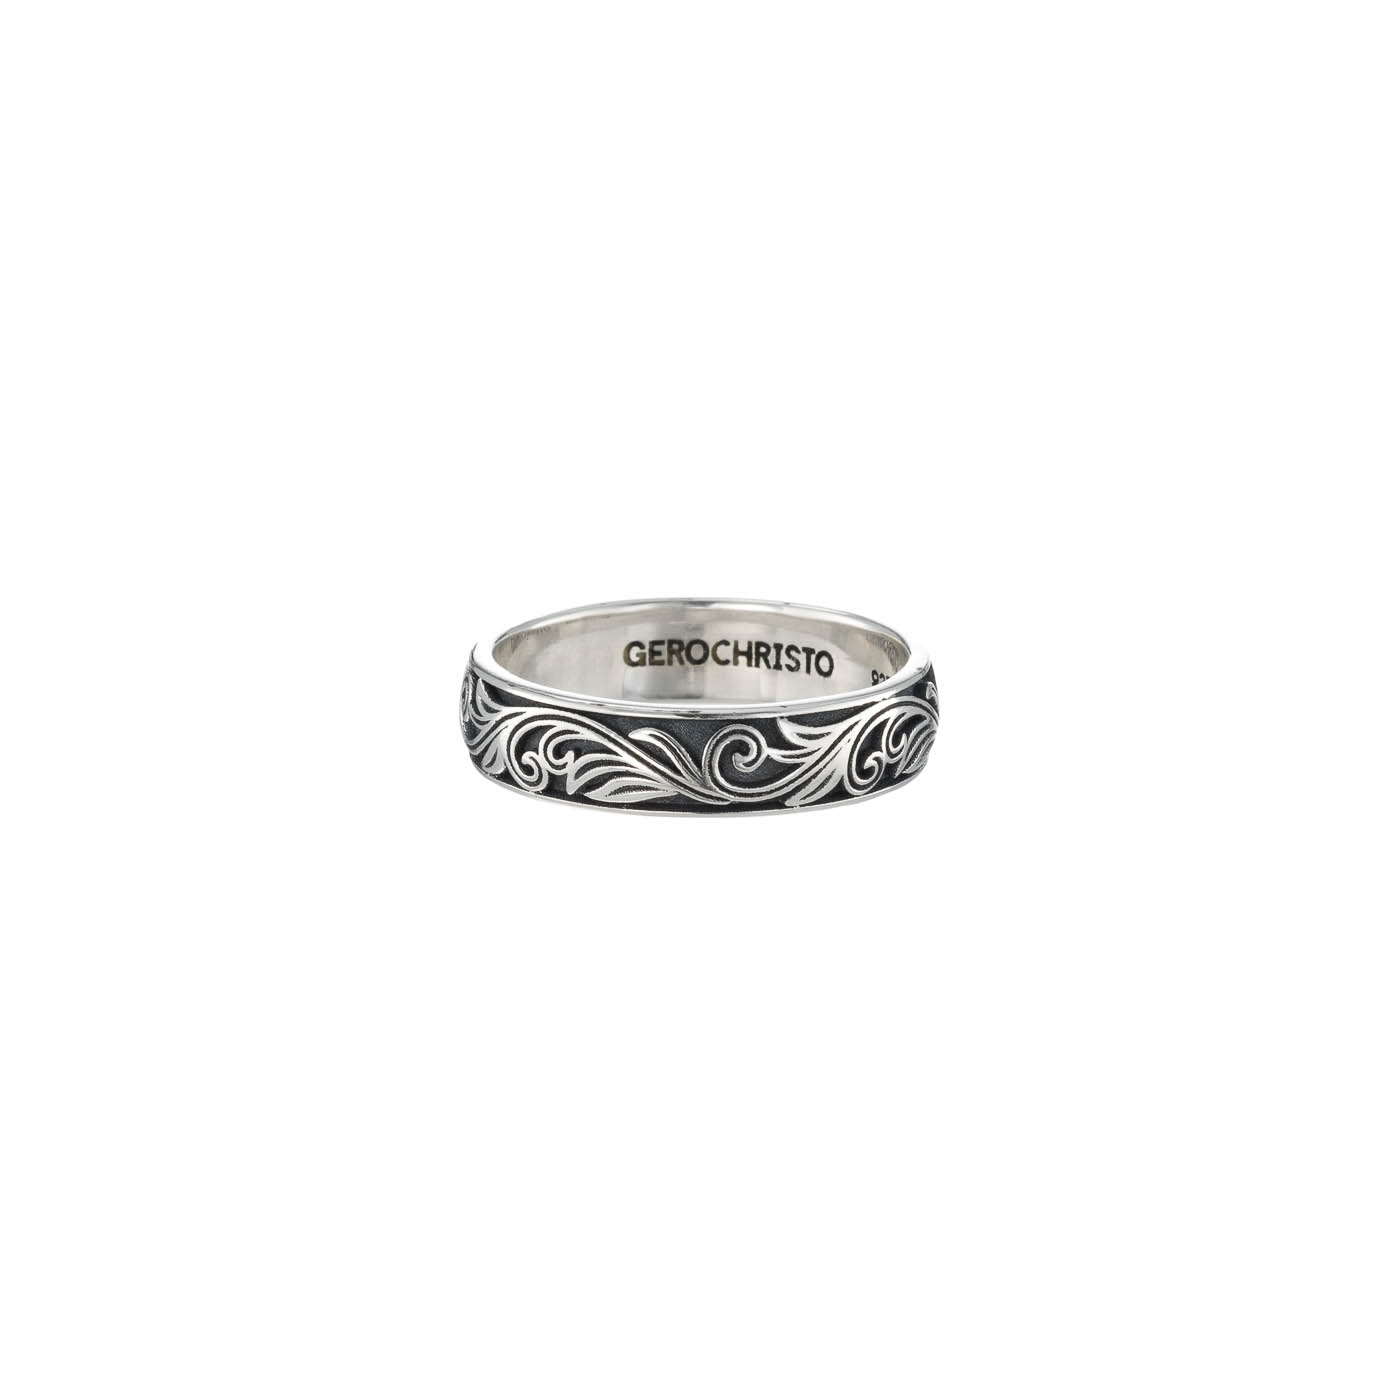 Floral Band ring in Sterling Silver - Gerochristo Jewelry